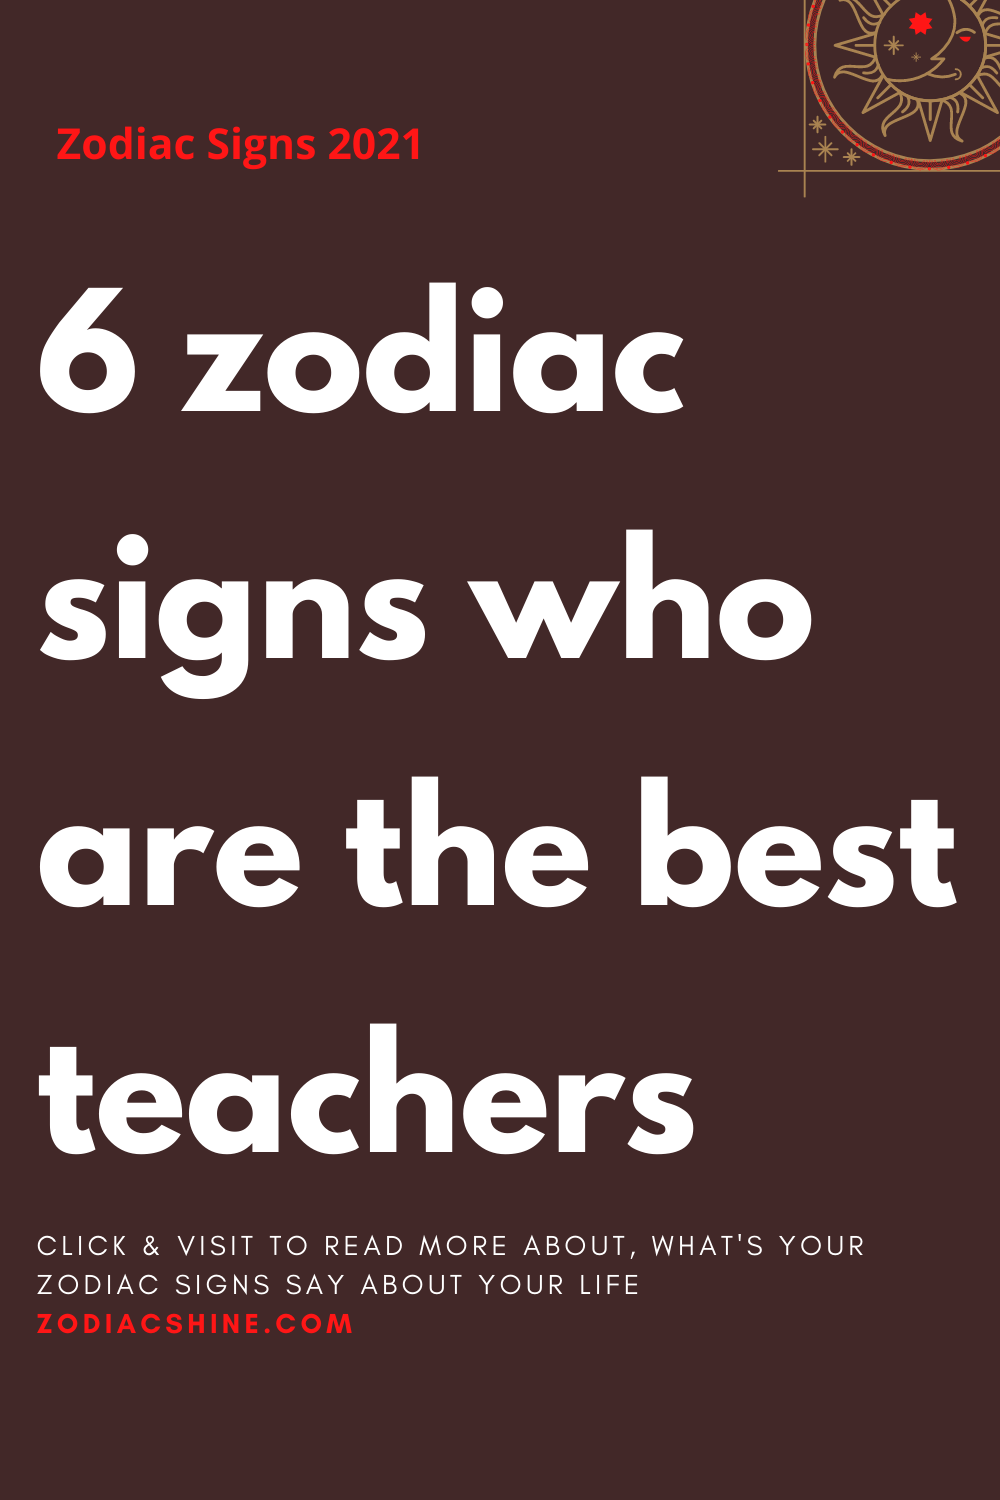 6 zodiac signs who are the best teachers